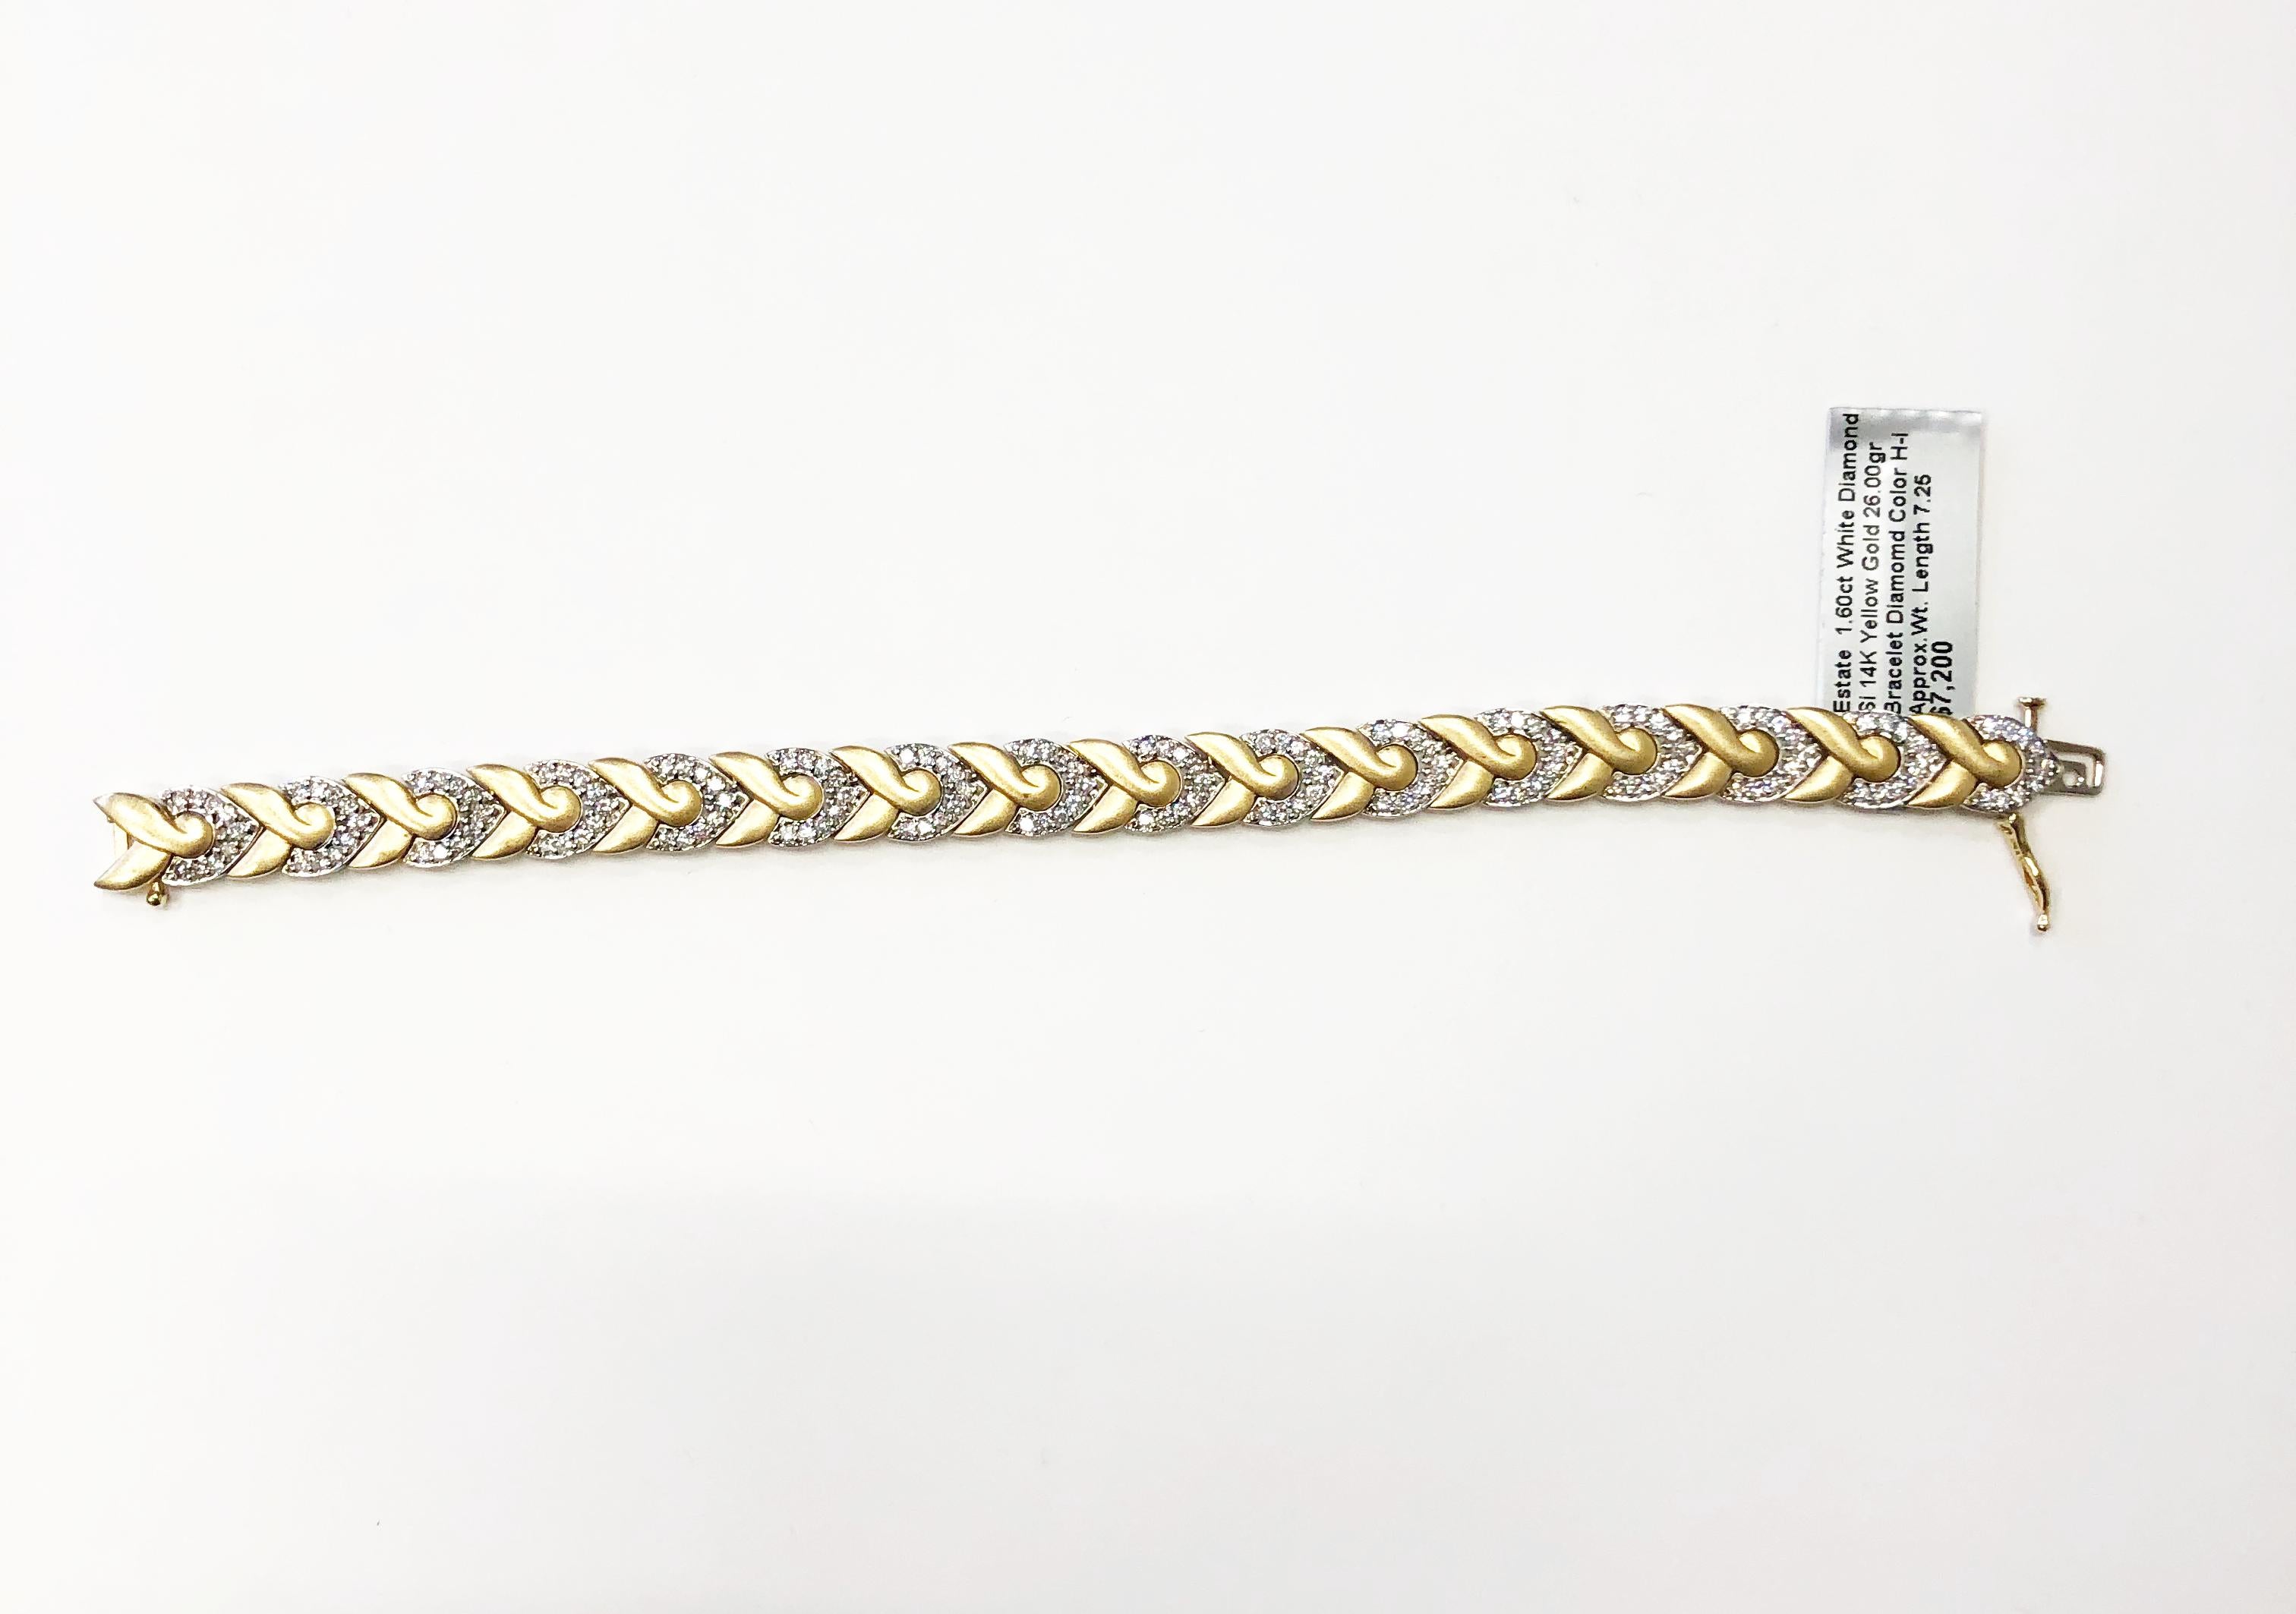 Beautiful estate diamond and gold bracelet showcasing 1.60 carats of white H/I diamonds and approximately 26 grams of gold.  Length is 7.25 inches.  This bracelet is flexible and the design is wearable everyday.  Stack it with other bracelets, a